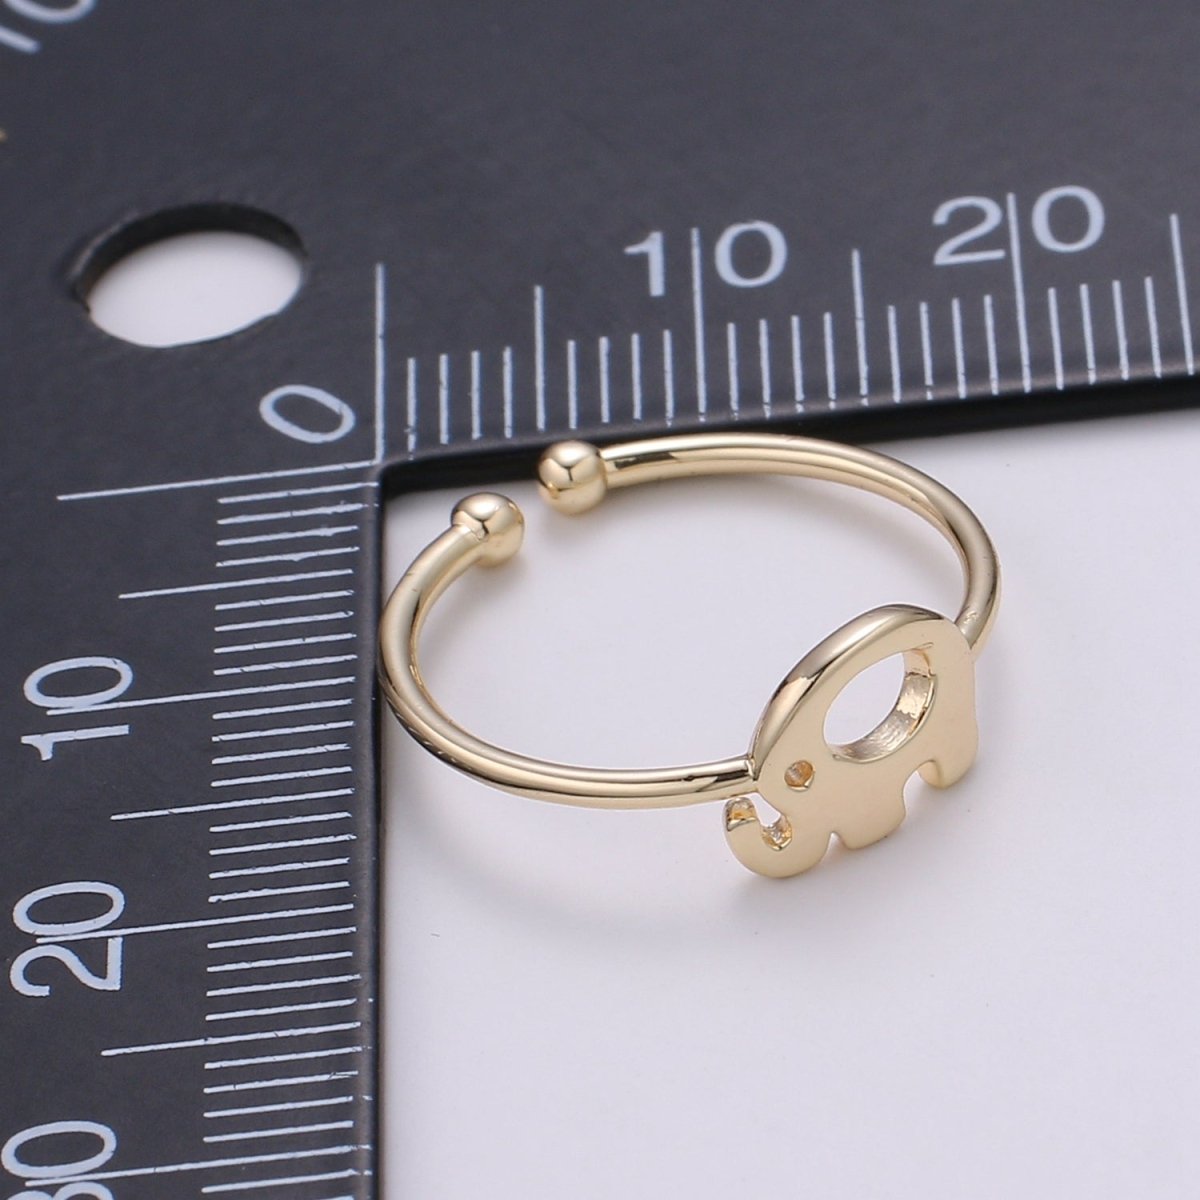 Elephant 18k Gold Ring, Adjustable Gold Curb Ring, Simple Animal Ring, The Forest R-266 - DLUXCA